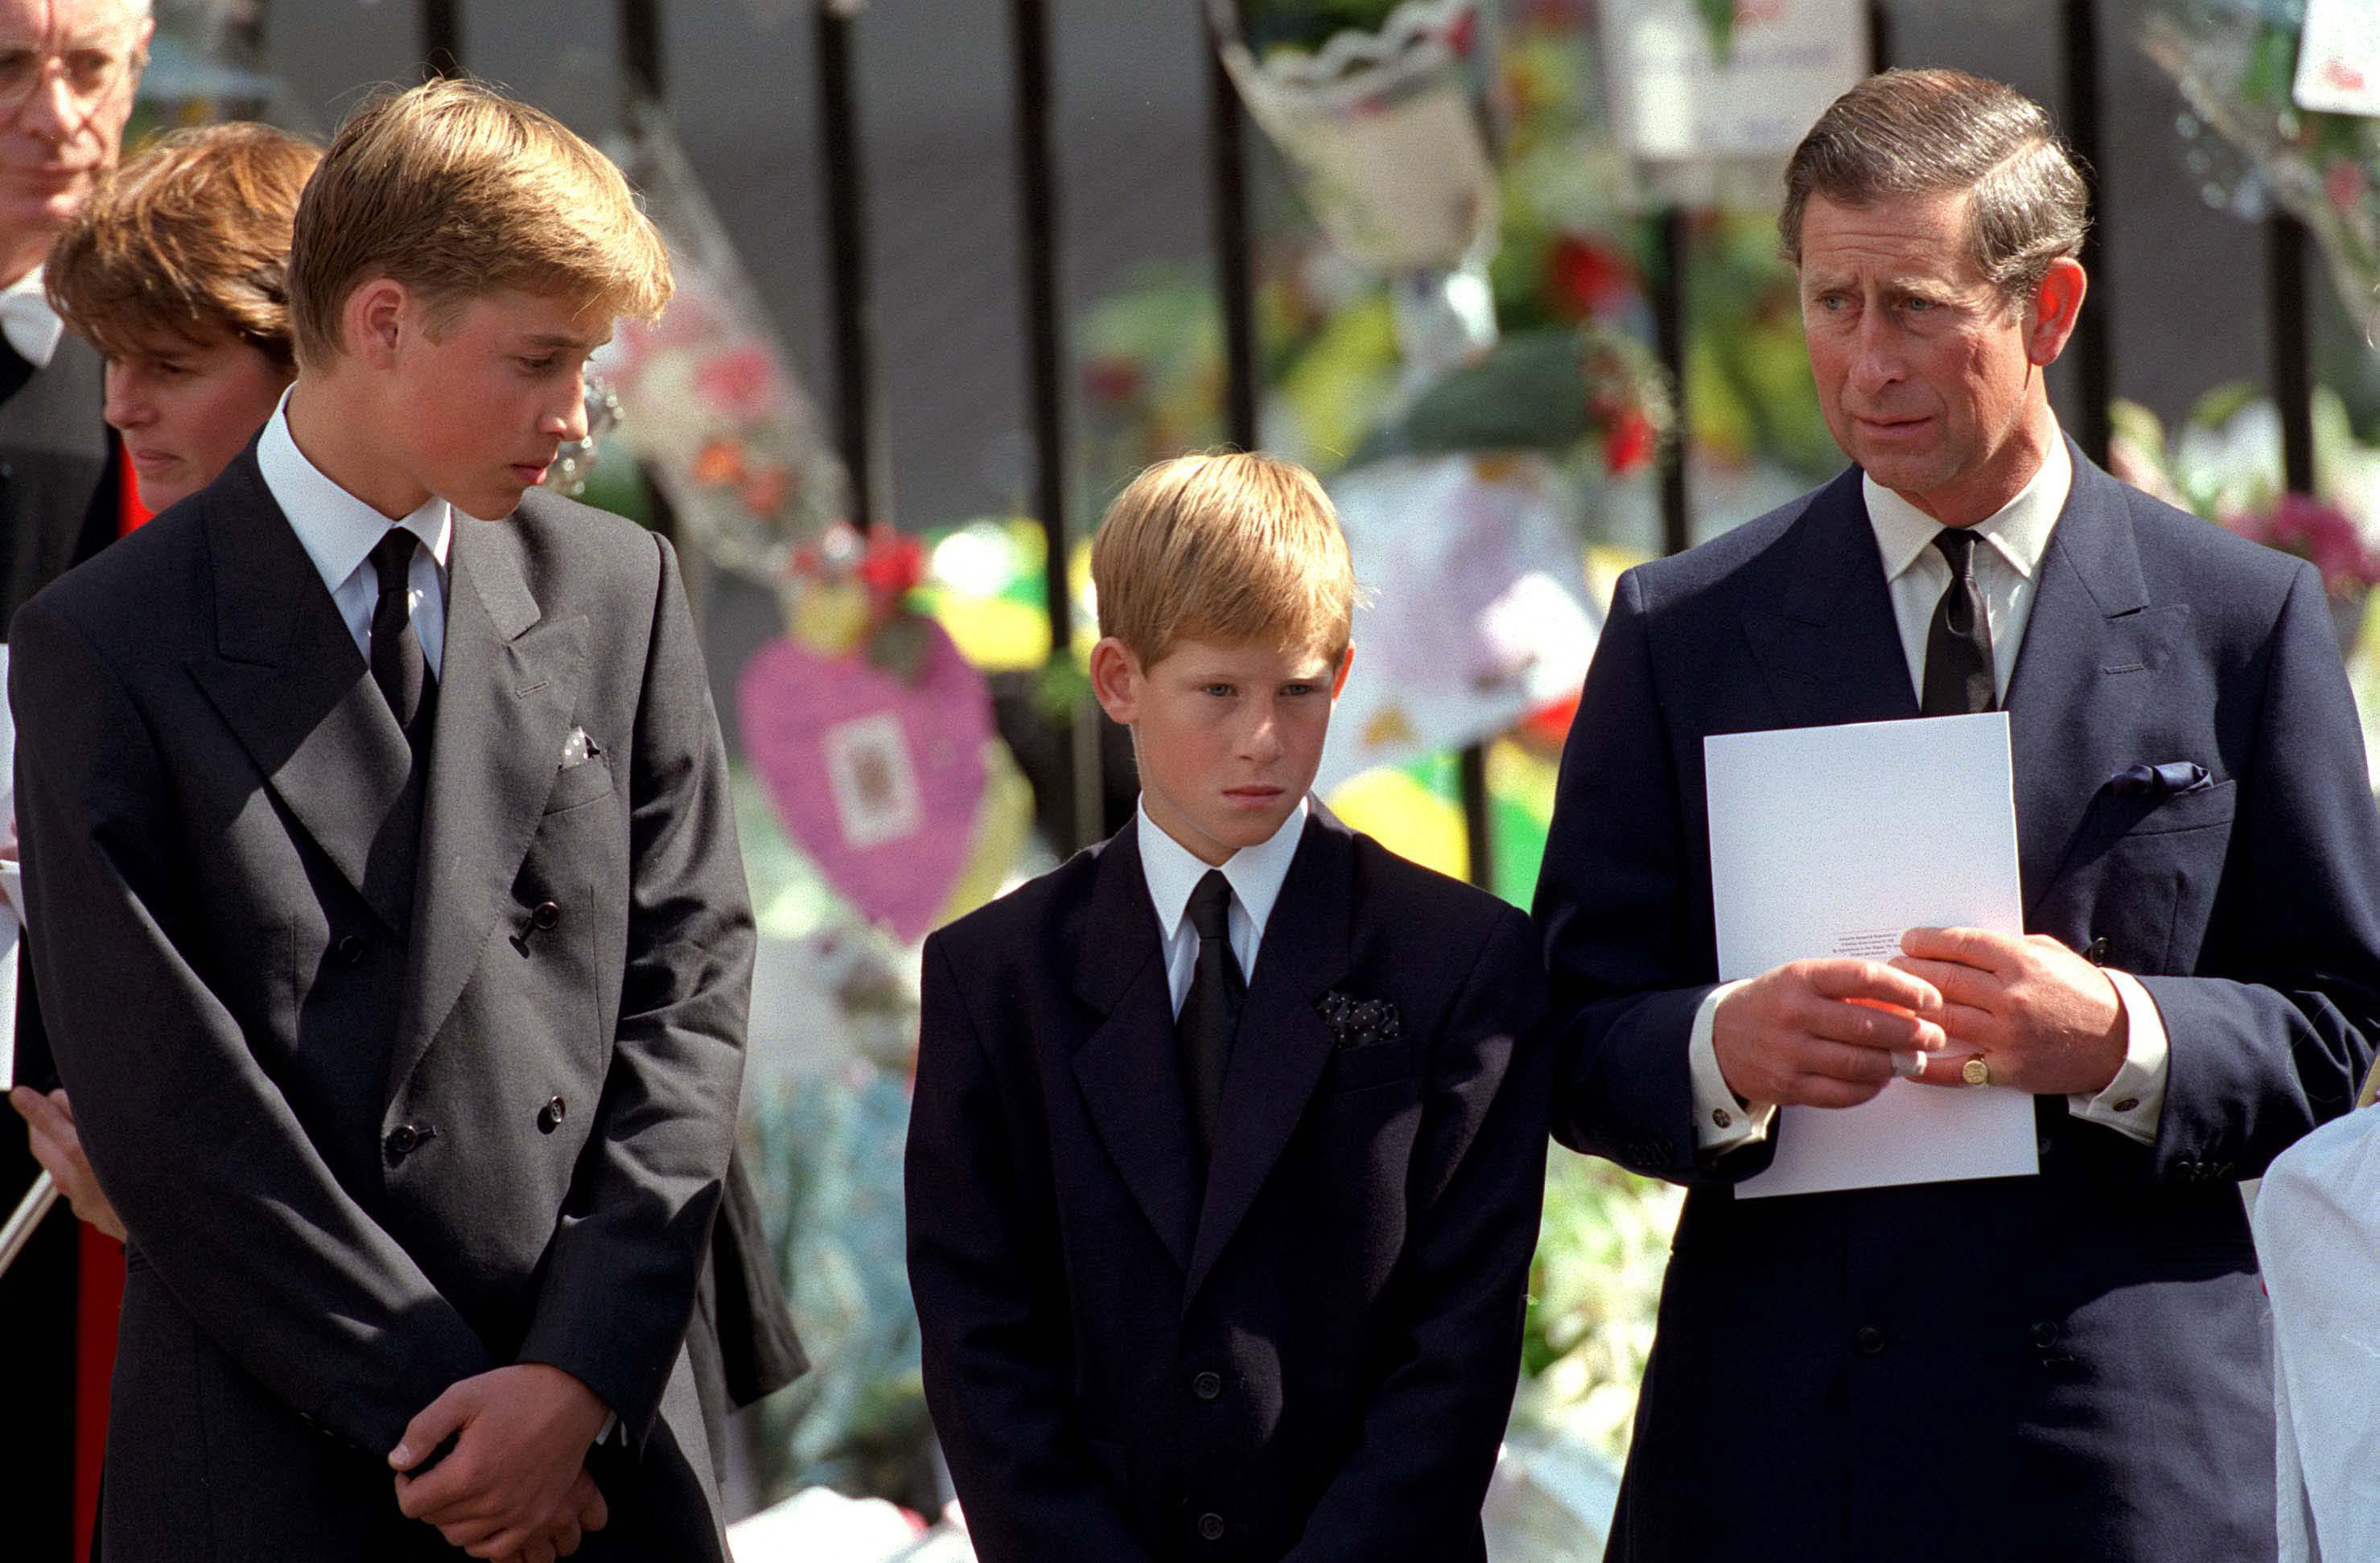 Prince William, Prince Harry and King Charles III at Princess Diana's funeral in London, England on September 6, 1997 | Source: Getty Images